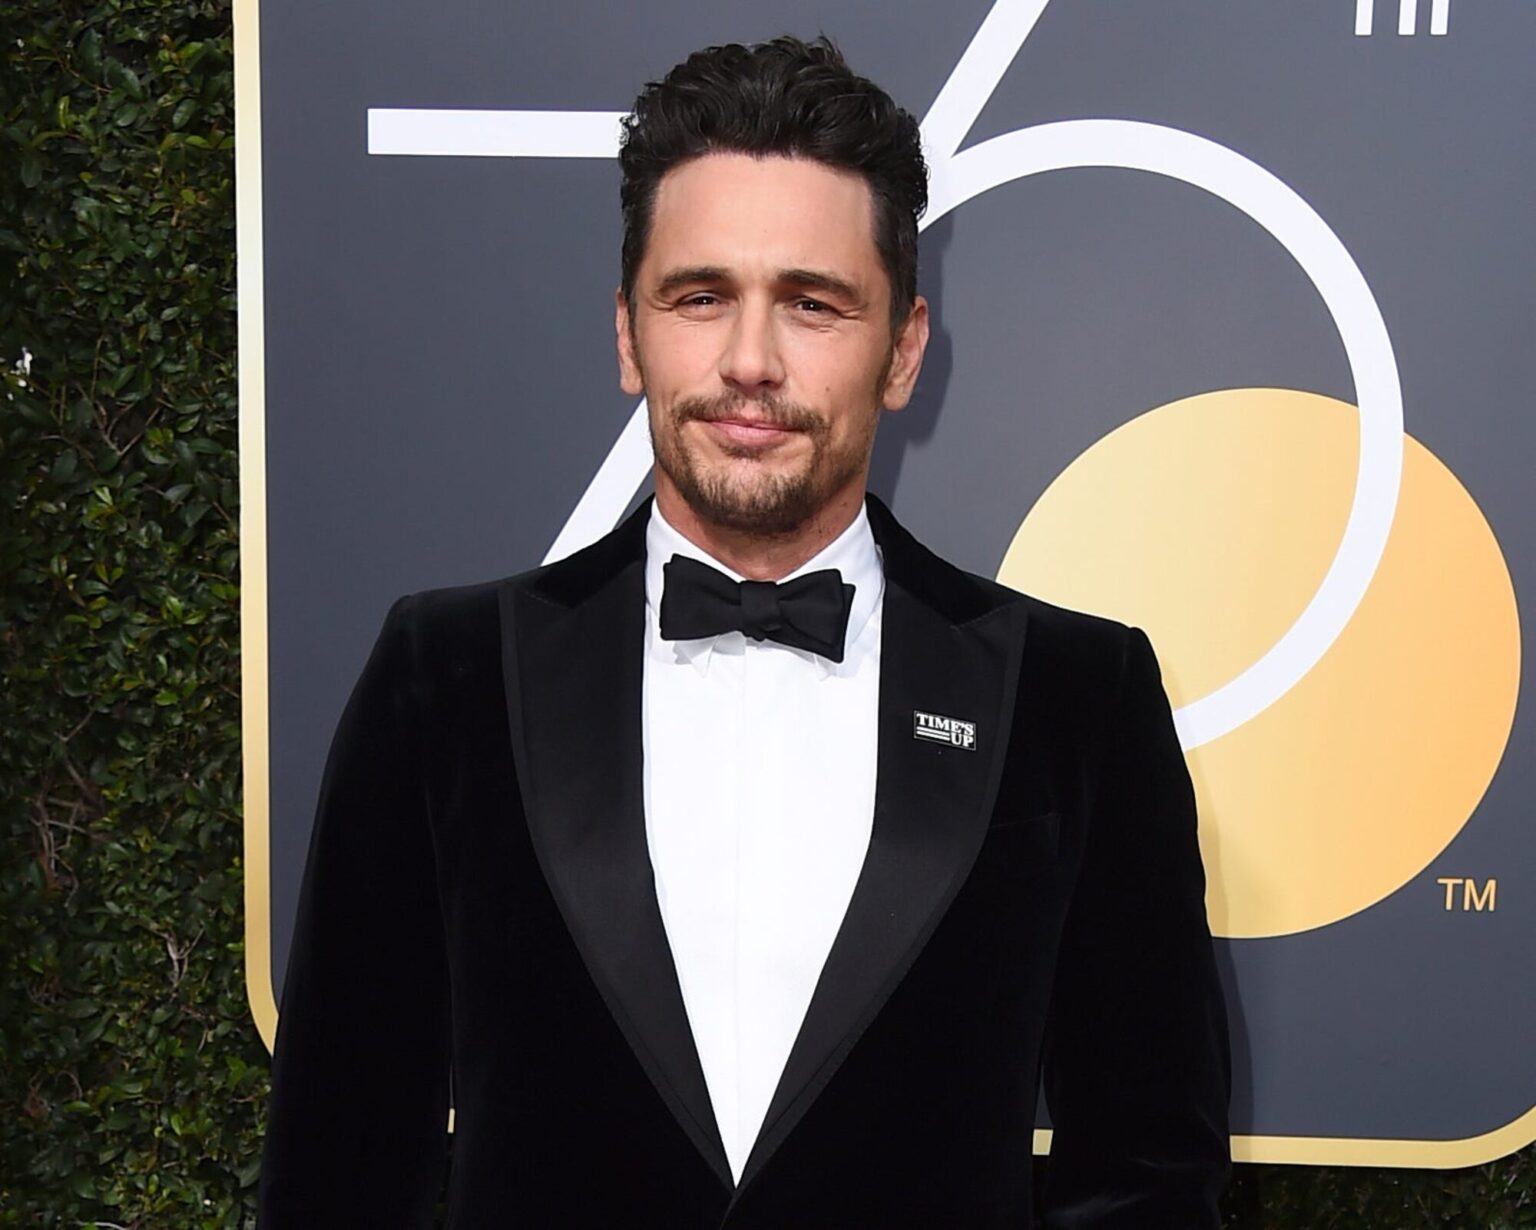 Will James Franco ever be able to star in movies again? Let’s take a look at all of the disturbing case details following his recent lawsuit.